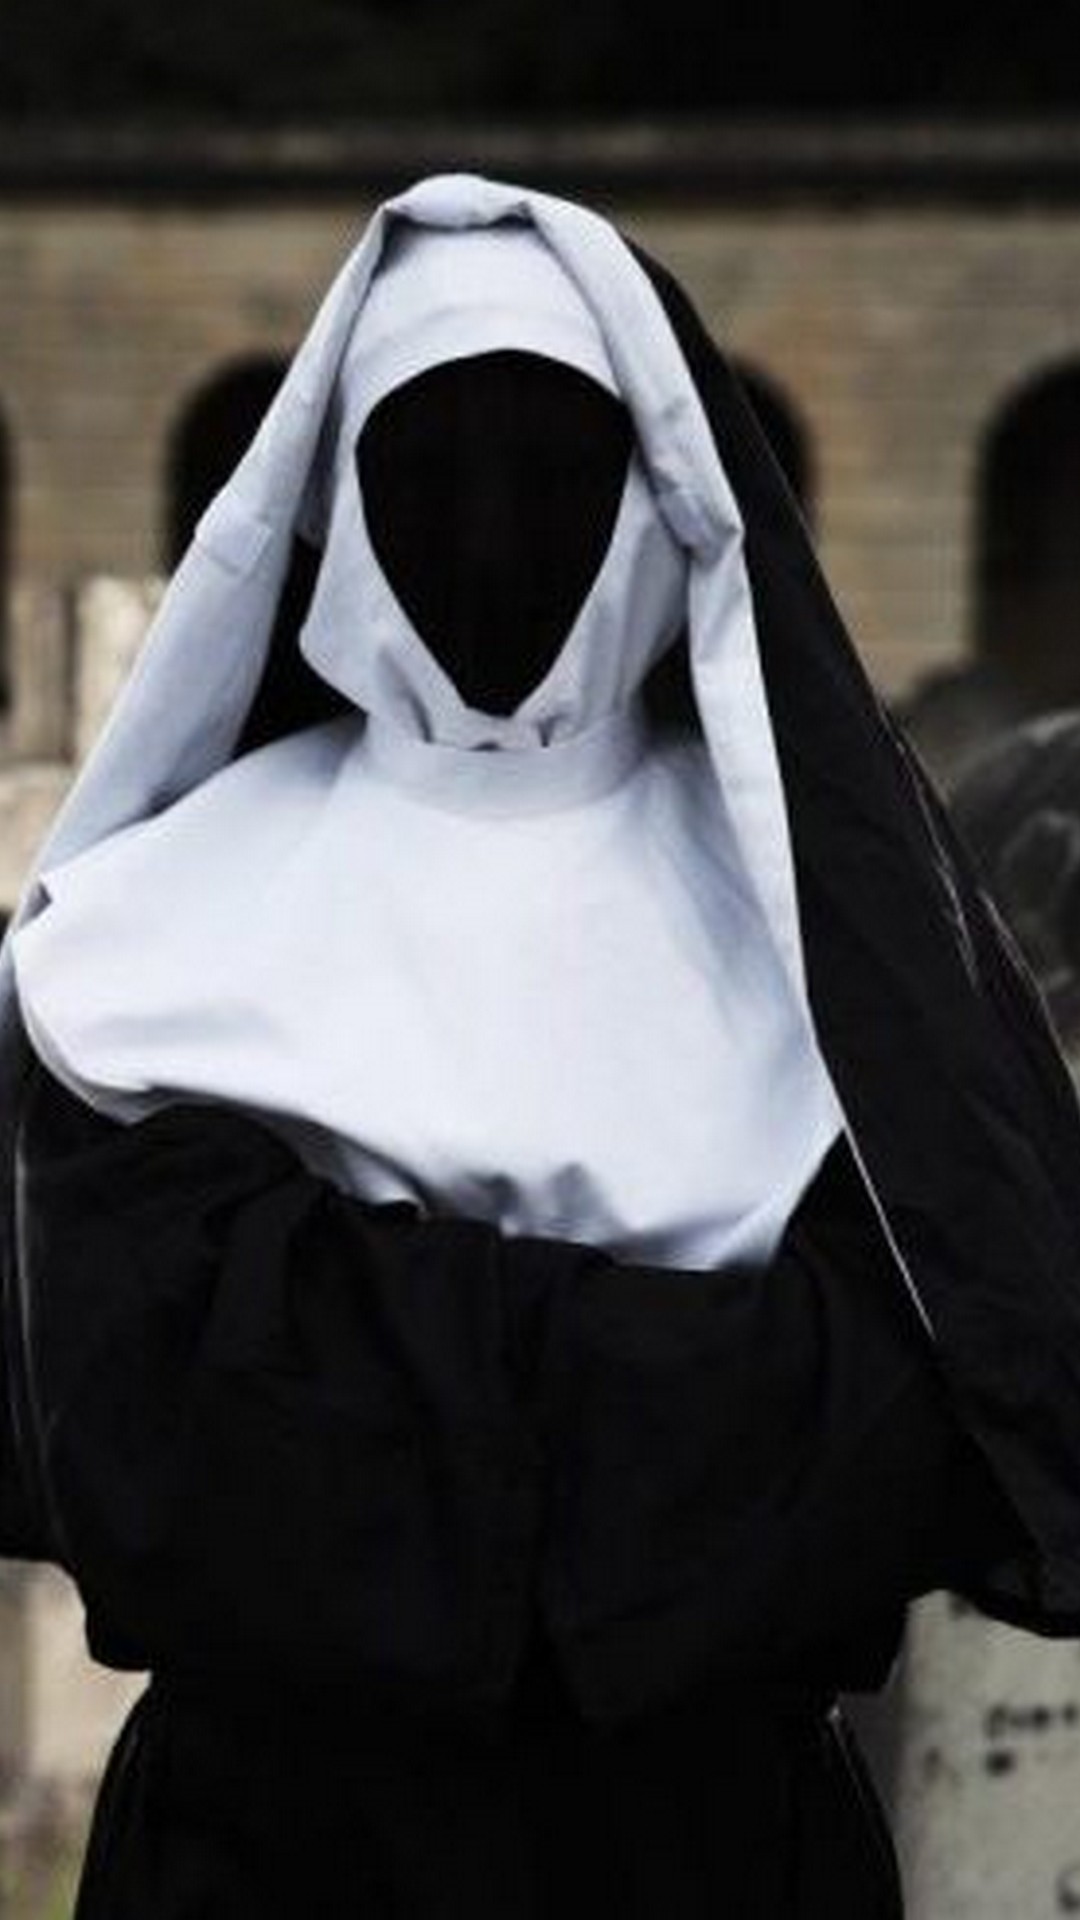 Wallpaper The Nun Movie Android with image resolution 1080x1920 pixel. You can make this wallpaper for your Android backgrounds, Tablet, Smartphones Screensavers and Mobile Phone Lock Screen